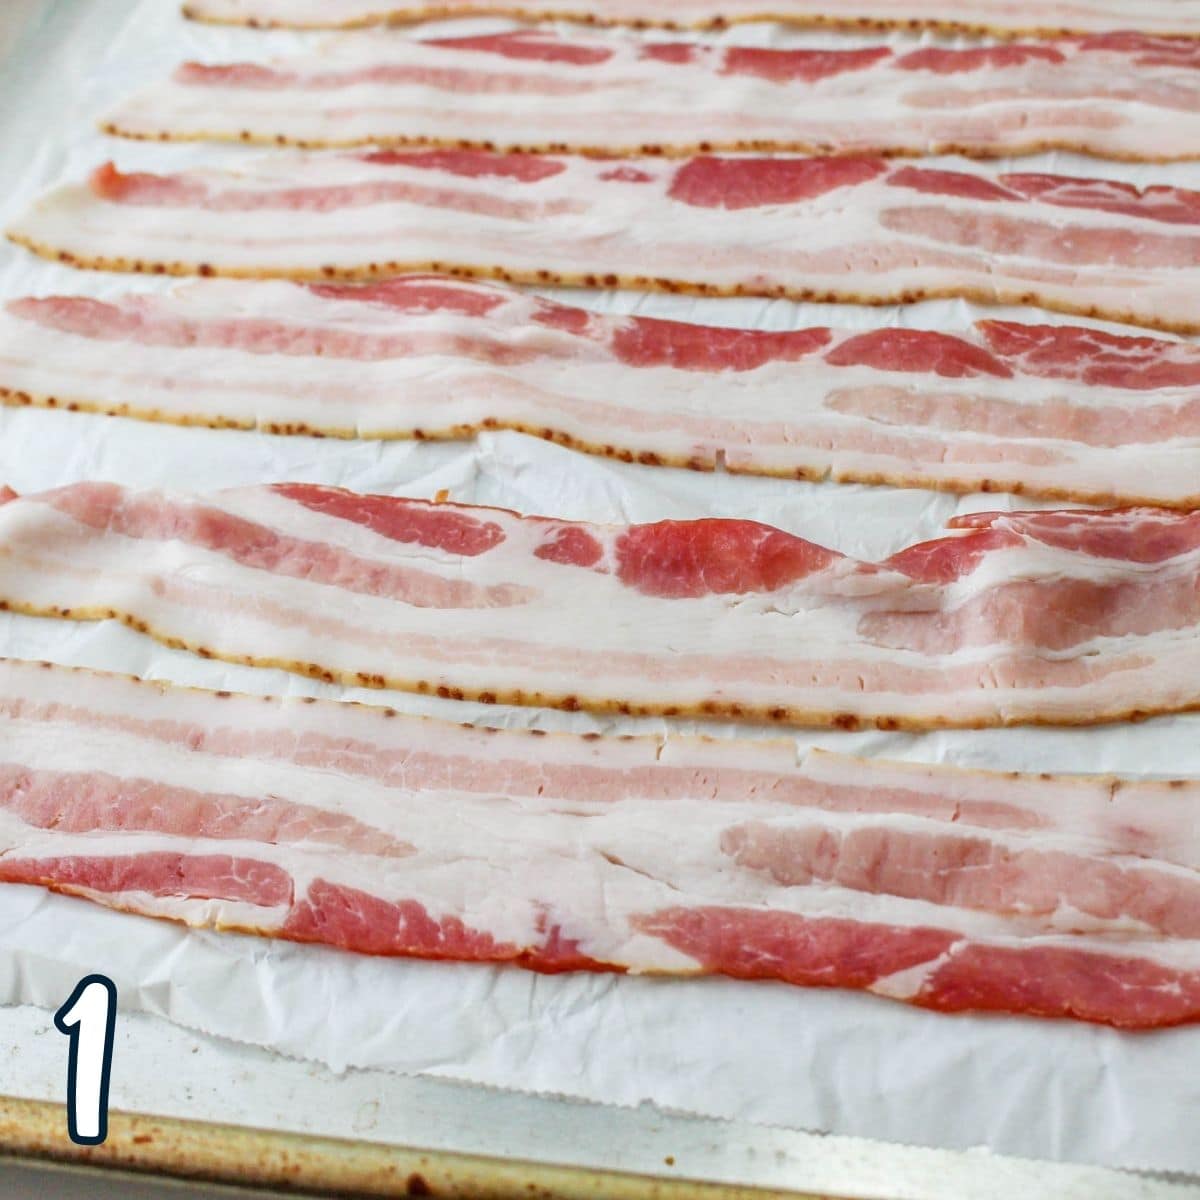 Raw bacon on parchment paper on a baking sheet.